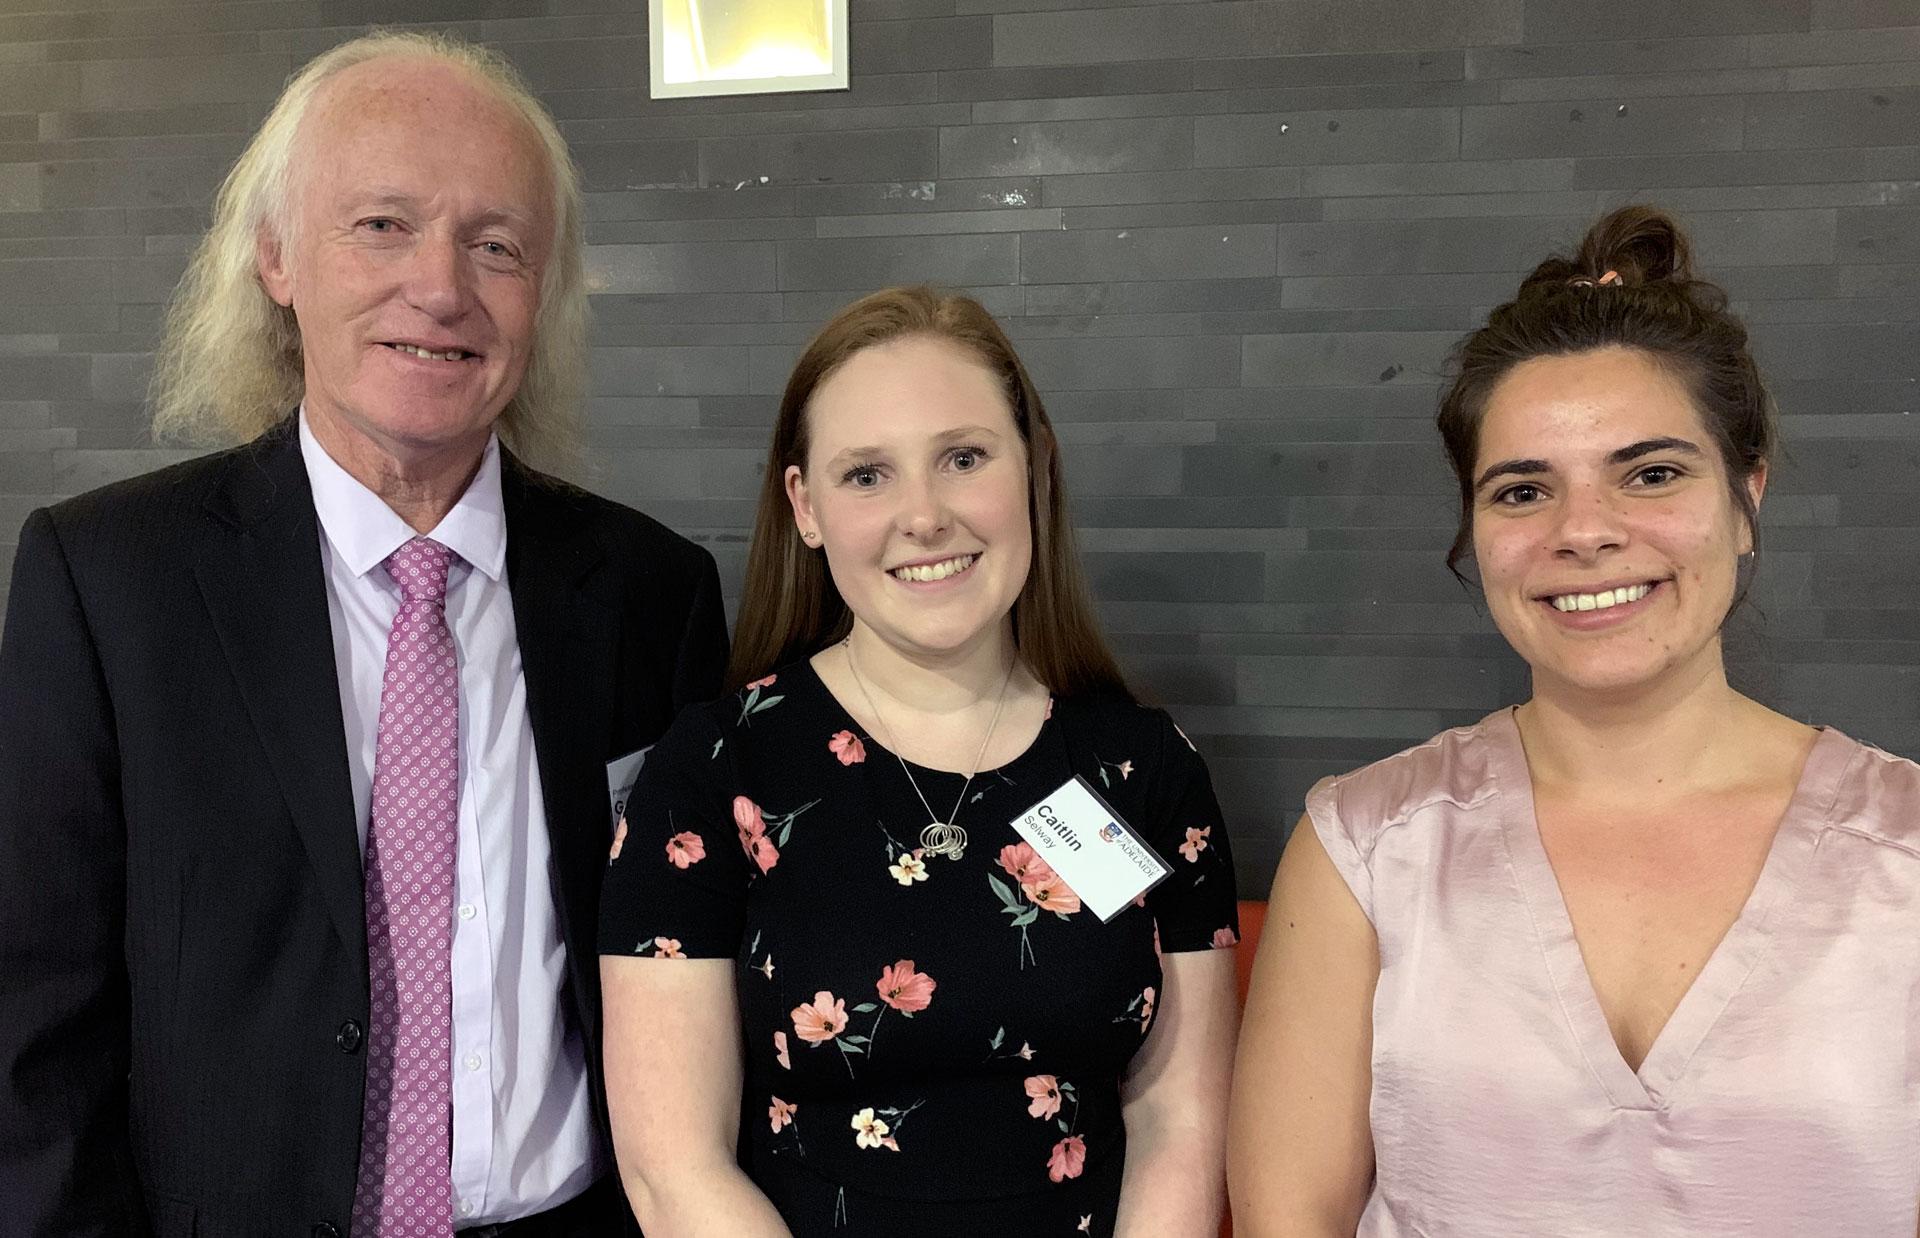 Sciences 3 minute thesis finals 2019 winners